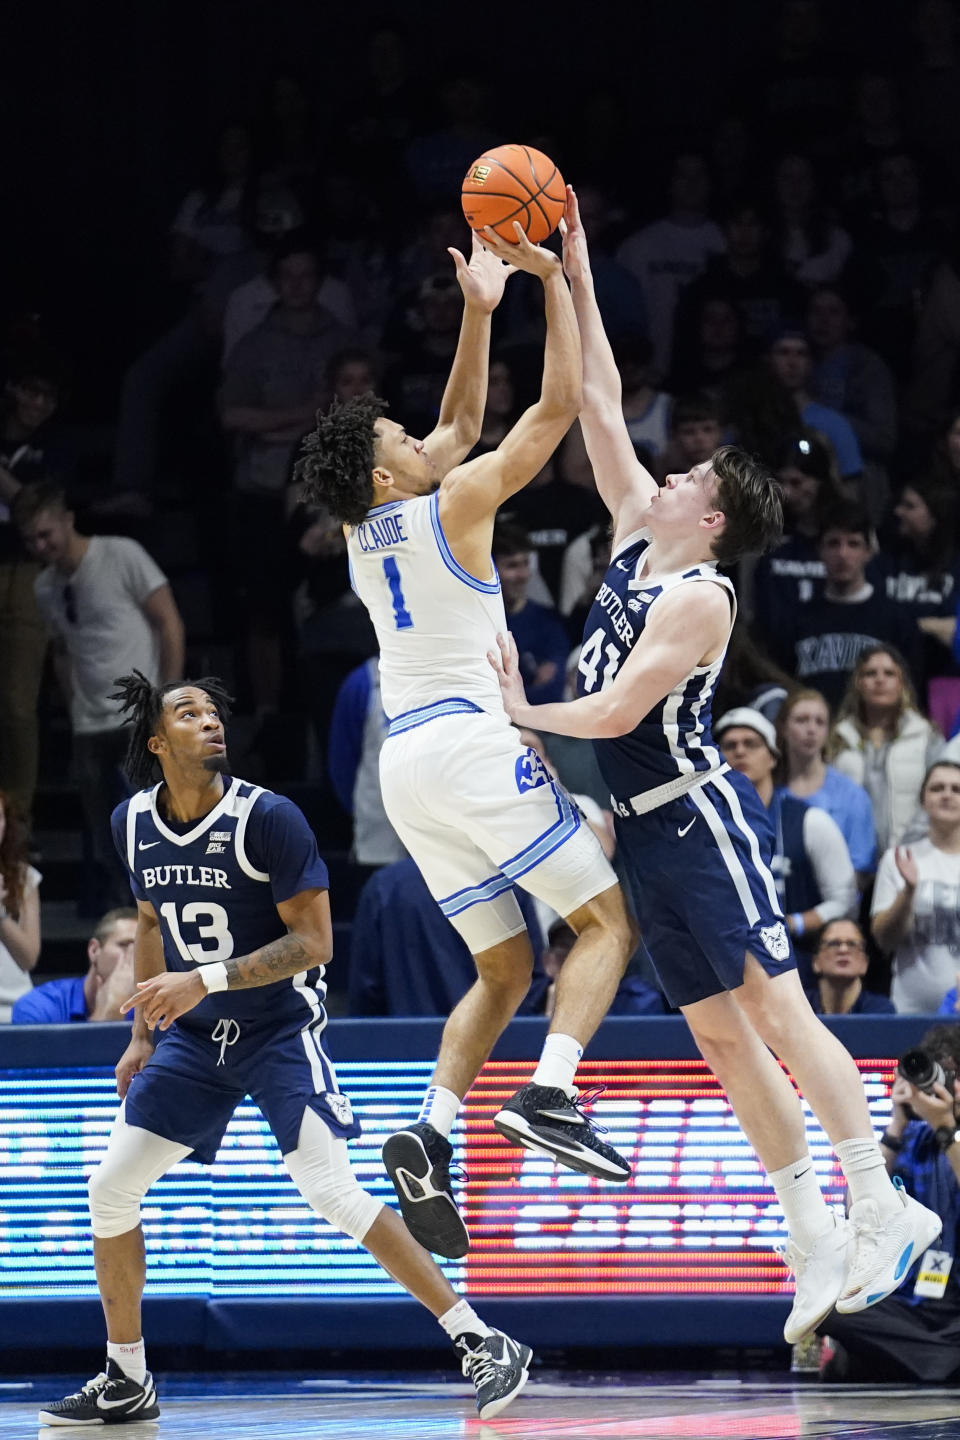 Xavier guard Desmond Claude (1) attempts to shoot as Butler guard Simas Lukosius (41) defends during the first half of an NCAA college basketball game, Saturday, March 4, 2023, in Cincinnati. (AP Photo/Joshua A. Bickel)